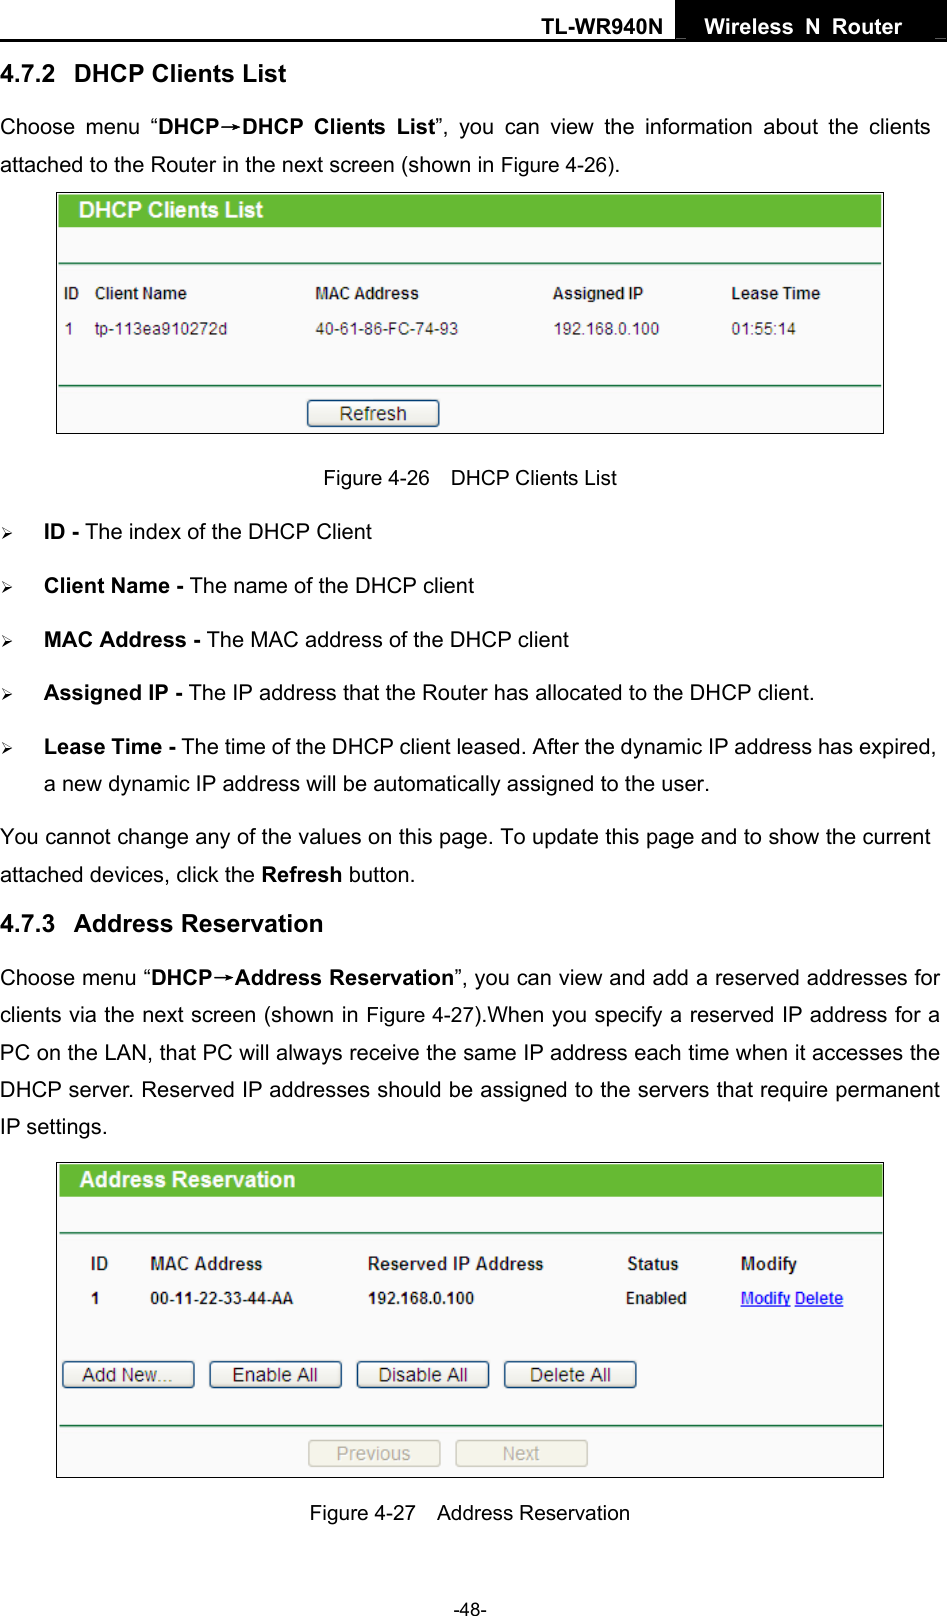 TL-WR940N  Wireless N Router   4.7.2  DHCP Clients List Choose menu “DHCP→DHCP Clients List”, you can view the information about the clients attached to the Router in the next screen (shown in Figure 4-26).  Figure 4-26    DHCP Clients List ¾ ID - The index of the DHCP Client   ¾ Client Name - The name of the DHCP client   ¾ MAC Address - The MAC address of the DHCP client   ¾ Assigned IP - The IP address that the Router has allocated to the DHCP client. ¾ Lease Time - The time of the DHCP client leased. After the dynamic IP address has expired, a new dynamic IP address will be automatically assigned to the user. You cannot change any of the values on this page. To update this page and to show the current attached devices, click the Refresh button. 4.7.3  Address Reservation Choose menu “DHCP→Address Reservation”, you can view and add a reserved addresses for clients via the next screen (shown in Figure 4-27).When you specify a reserved IP address for a PC on the LAN, that PC will always receive the same IP address each time when it accesses the DHCP server. Reserved IP addresses should be assigned to the servers that require permanent IP settings.    Figure 4-27  Address Reservation -48- 